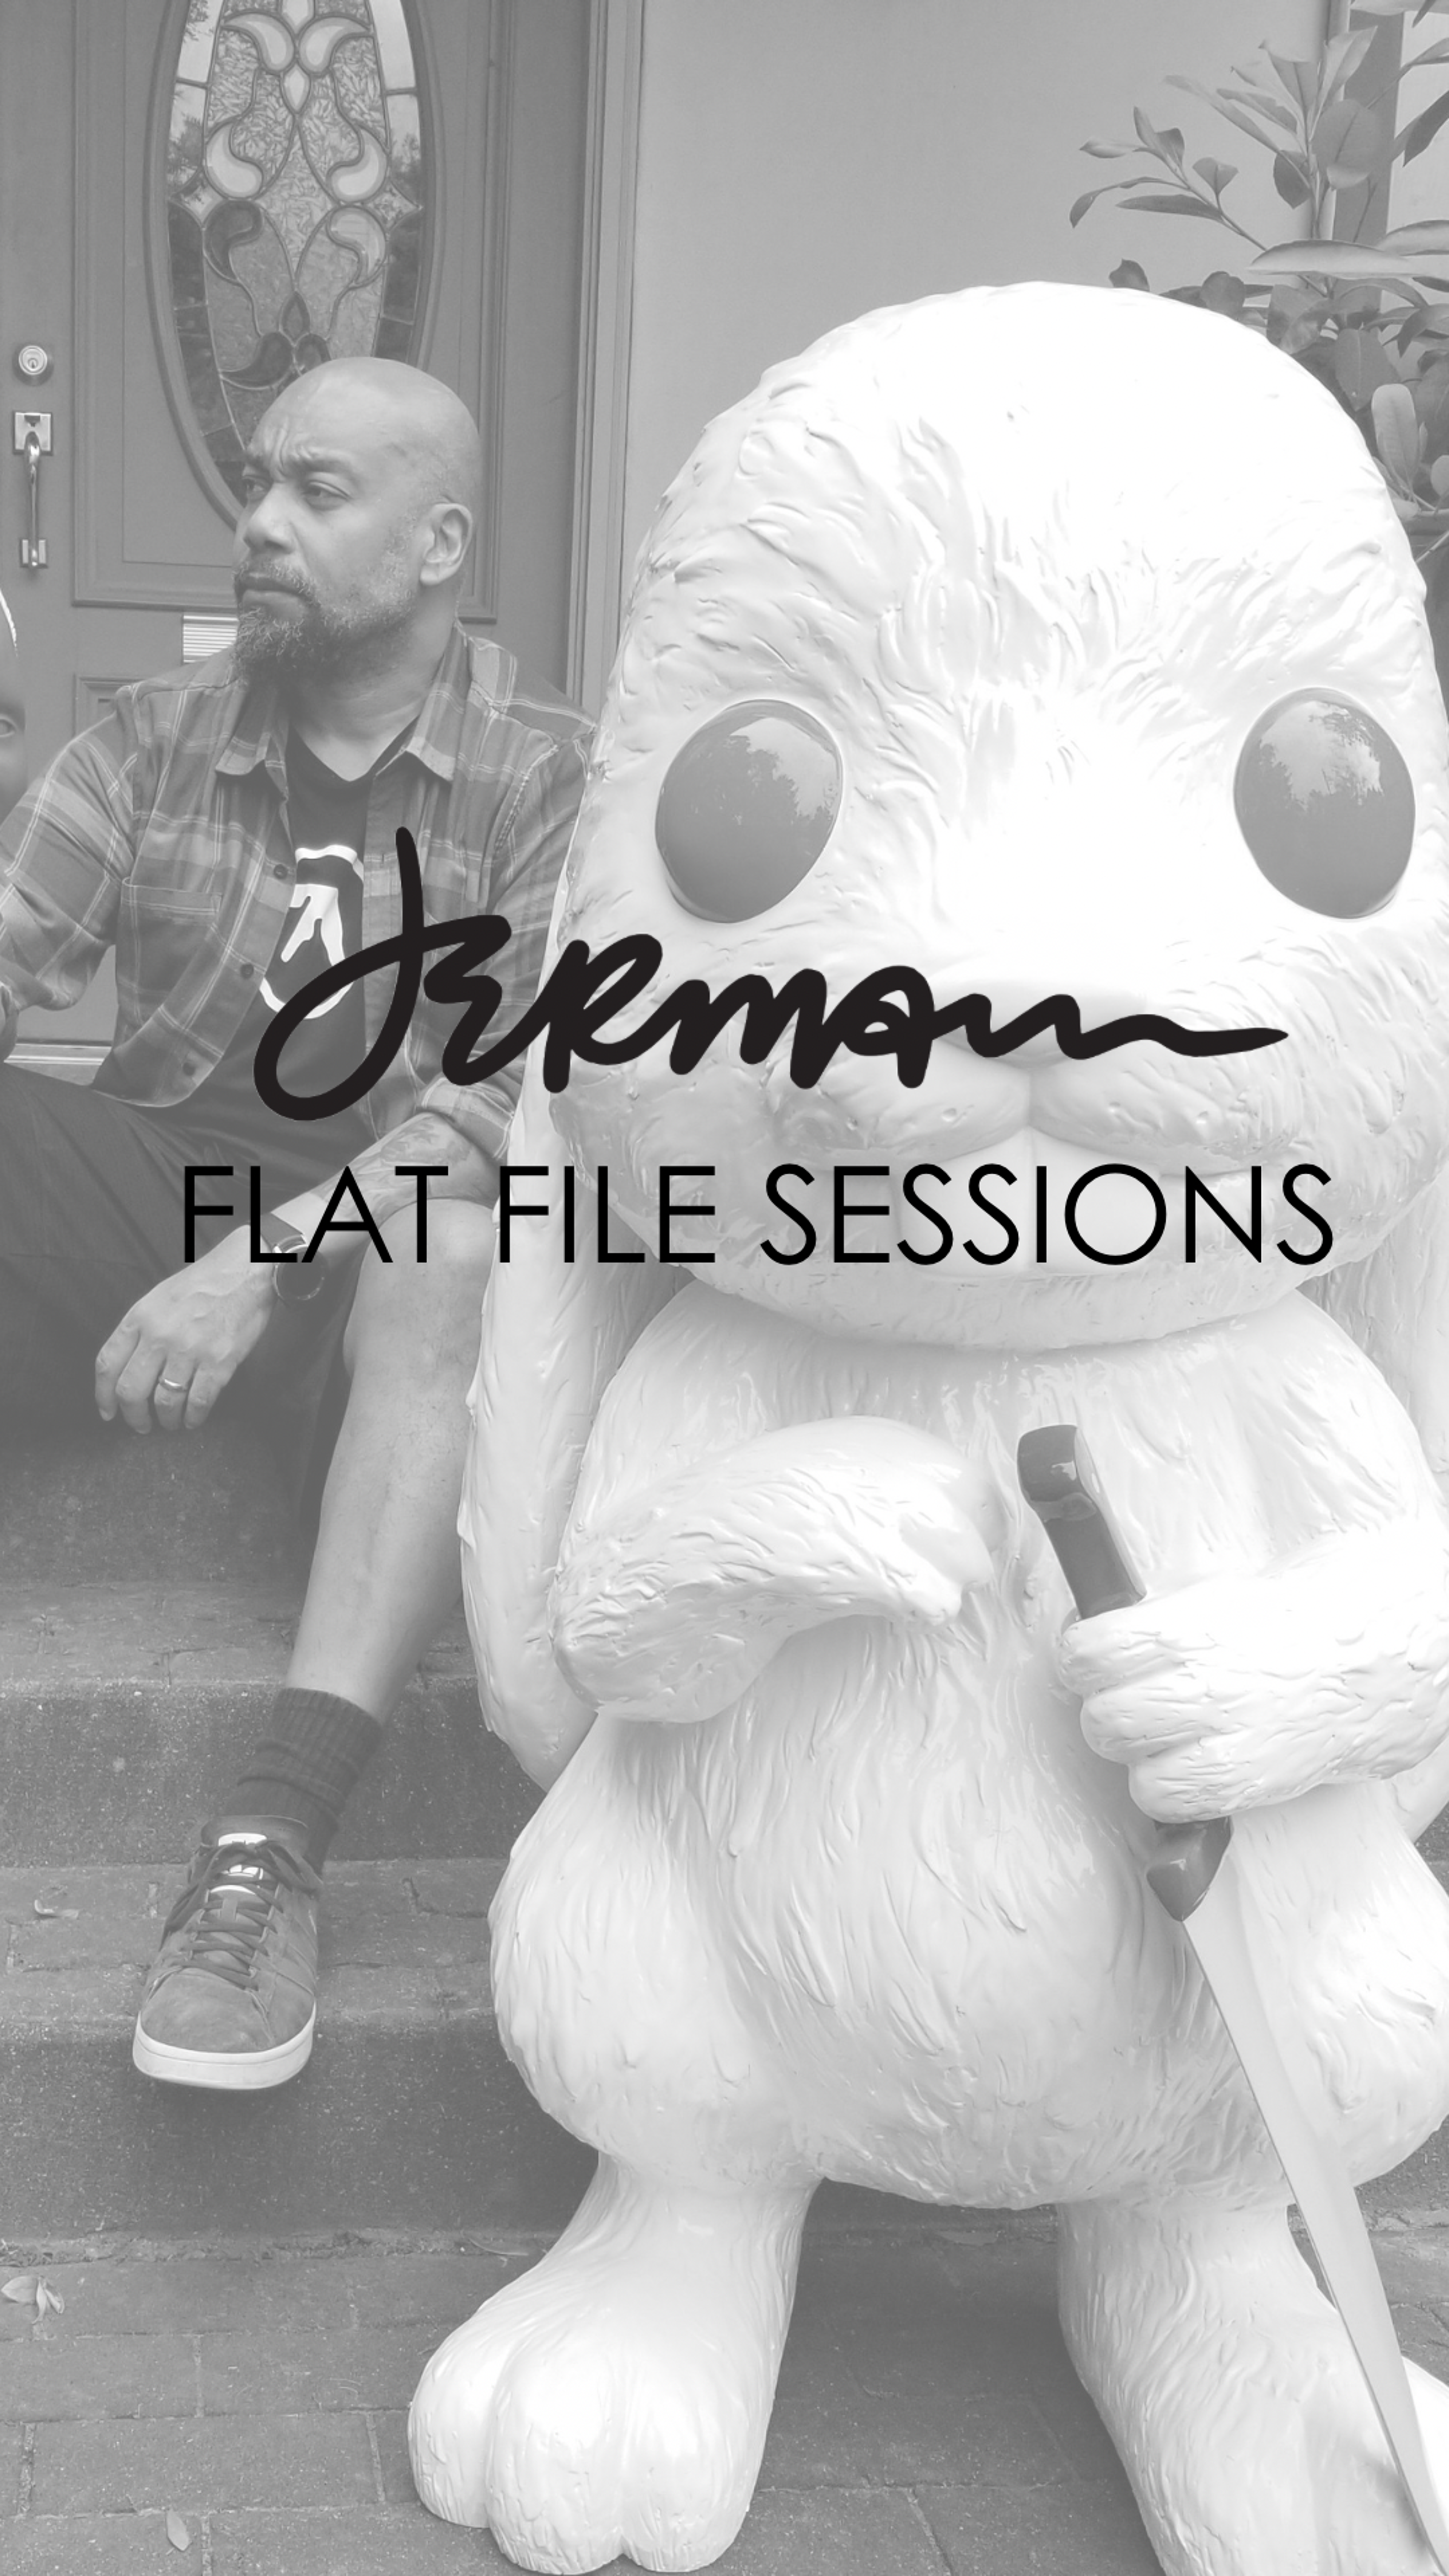 Preview image for the show titled "Jermaine Rogers Flat File Sessions" at Today @ 7:00 PM